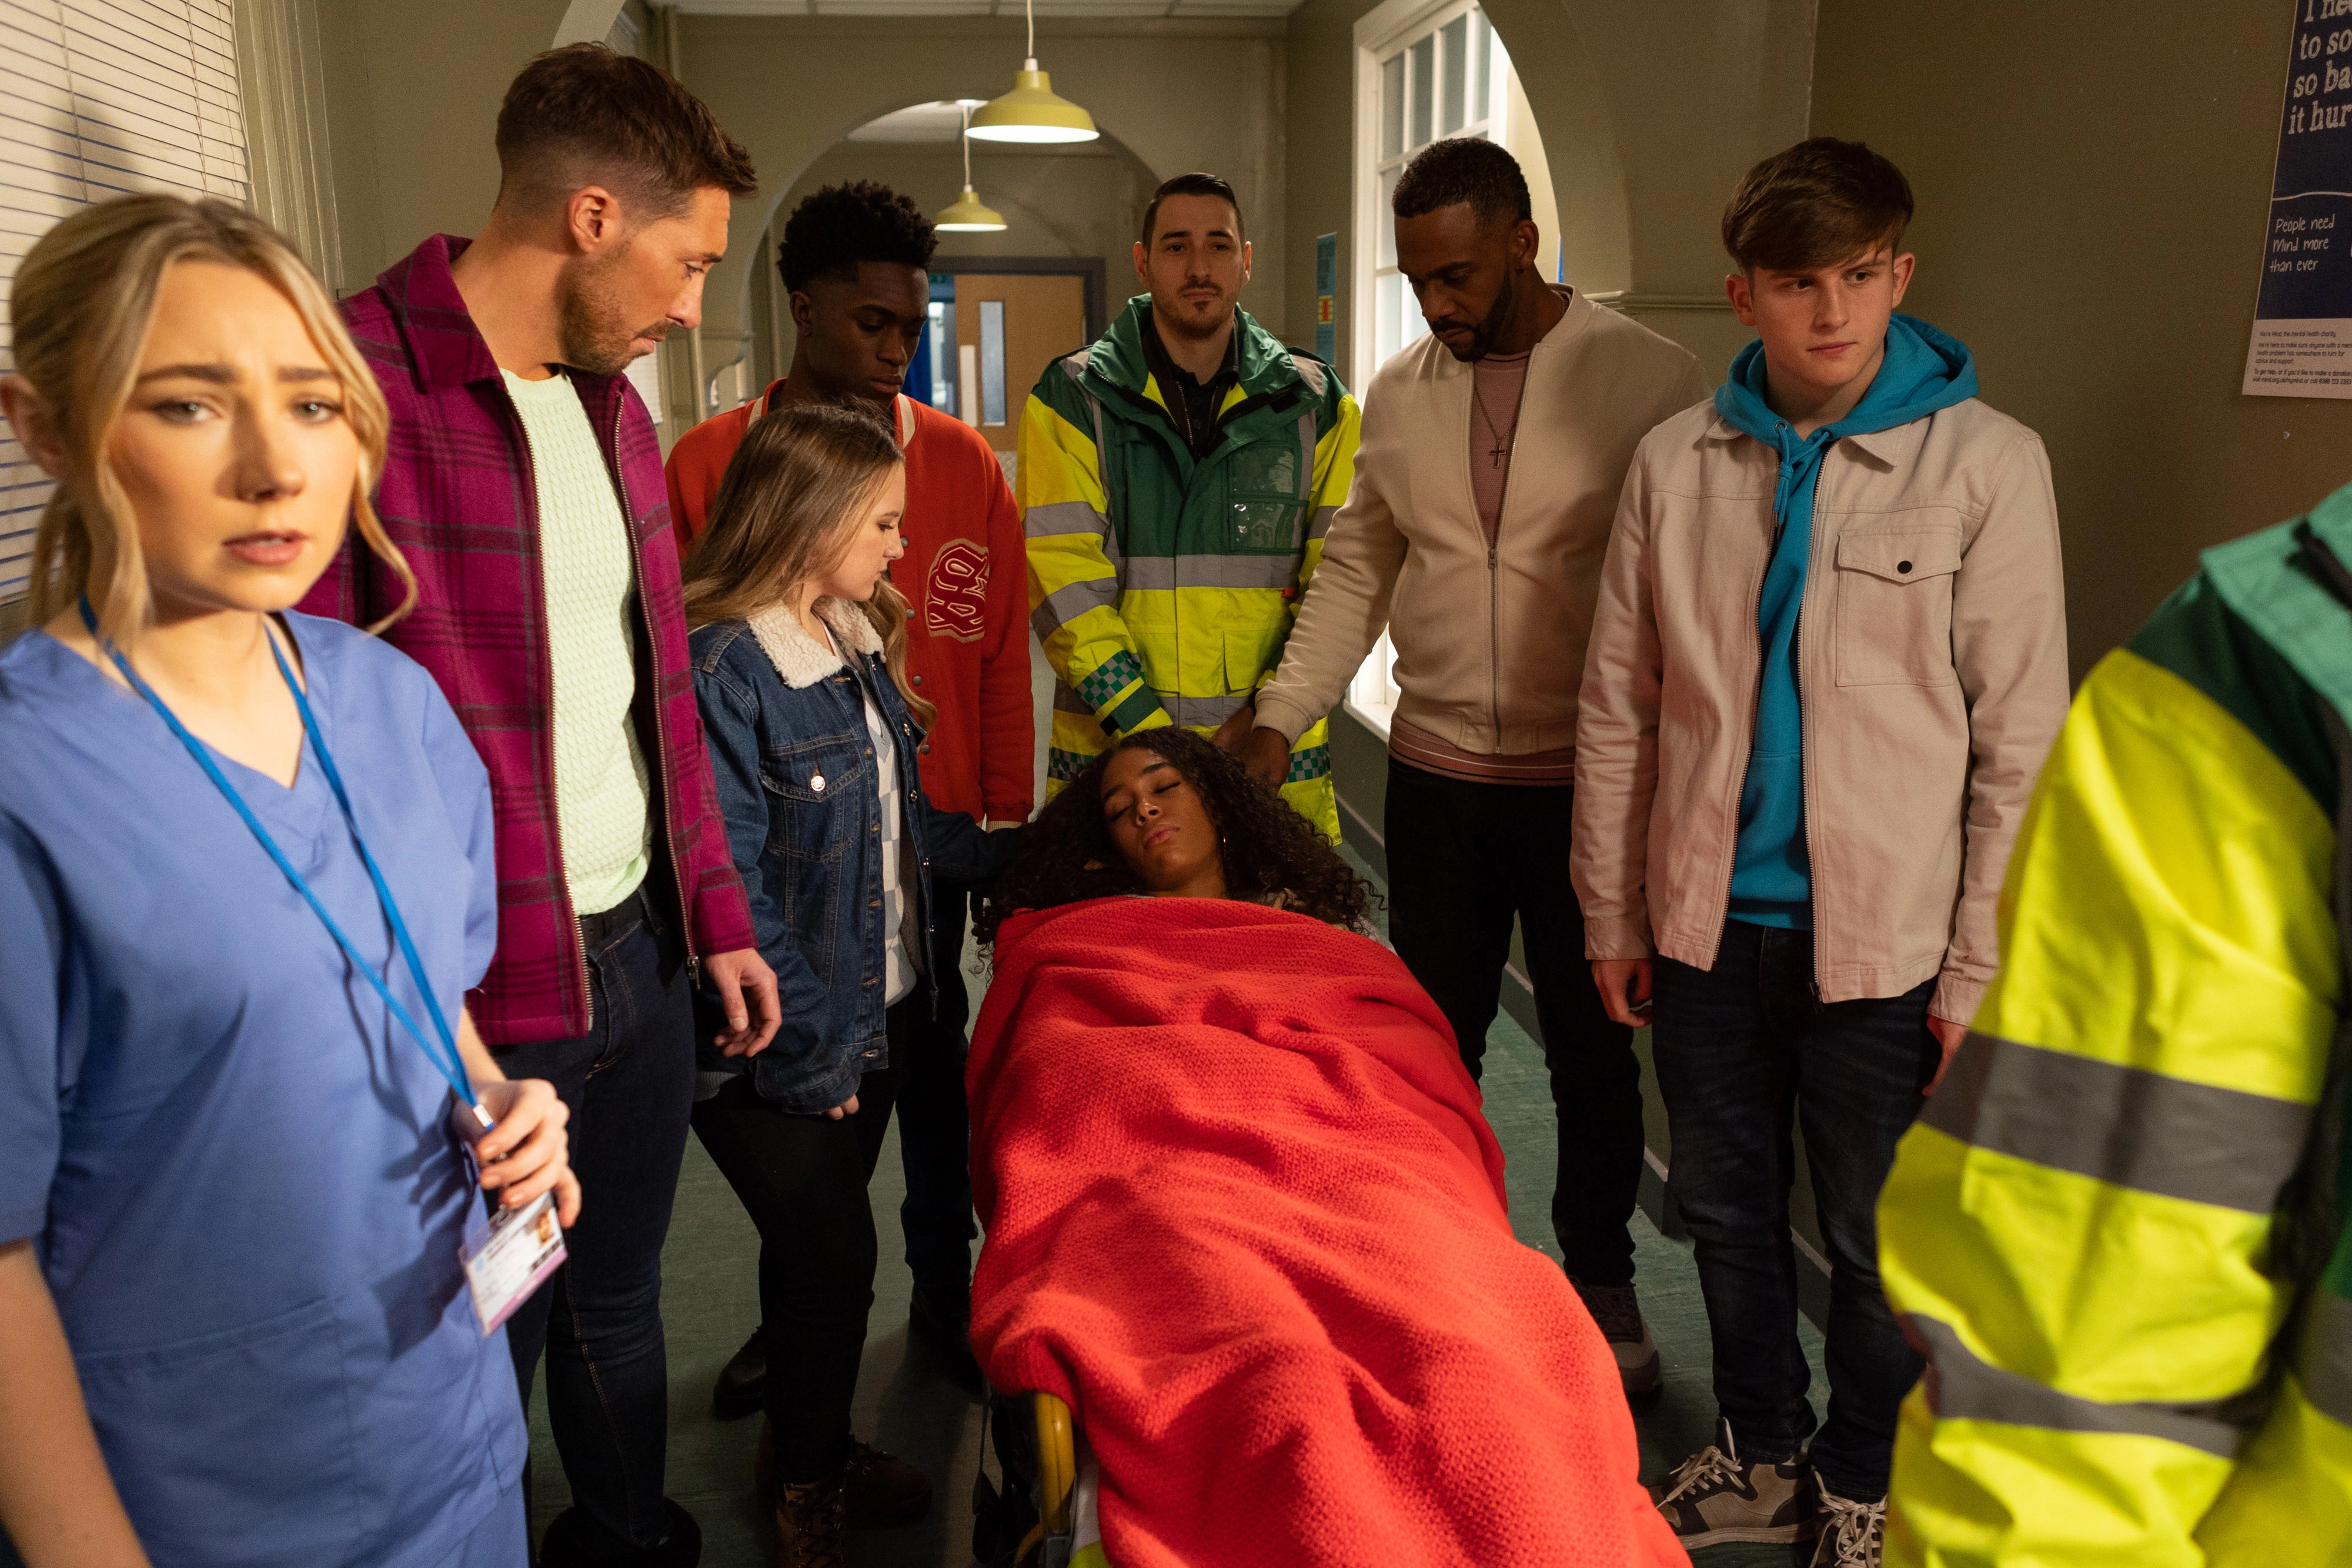 Five jaw-dropping Hollyoaks spoilers: horror fall truth revealed and an explosive revenge plan